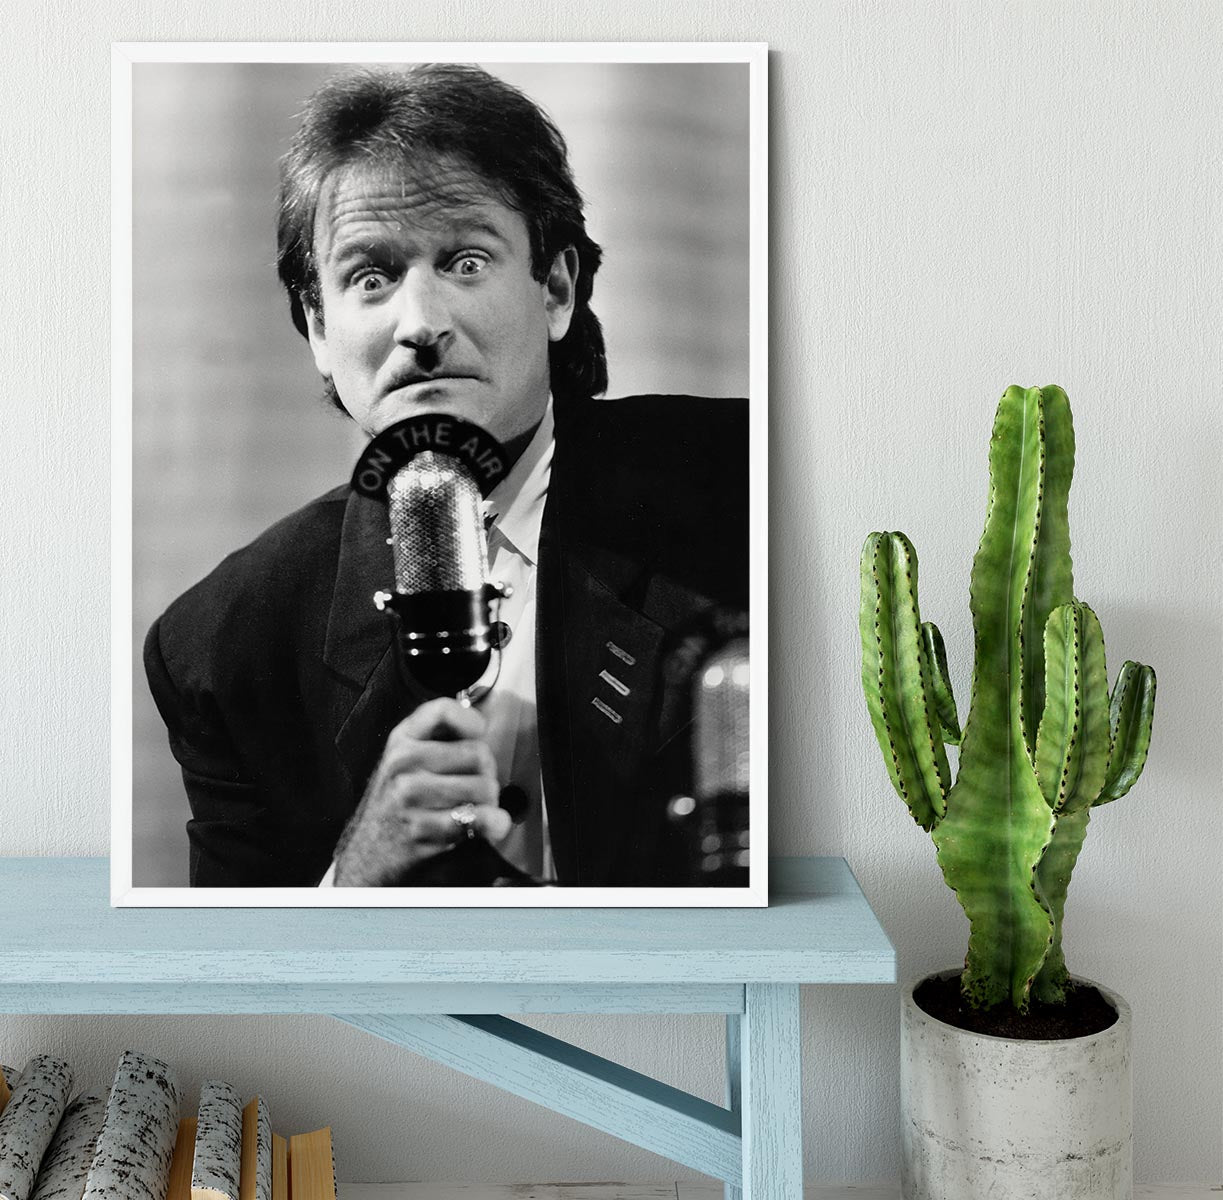 Robin Williams at the microphone Framed Print - Canvas Art Rocks -6